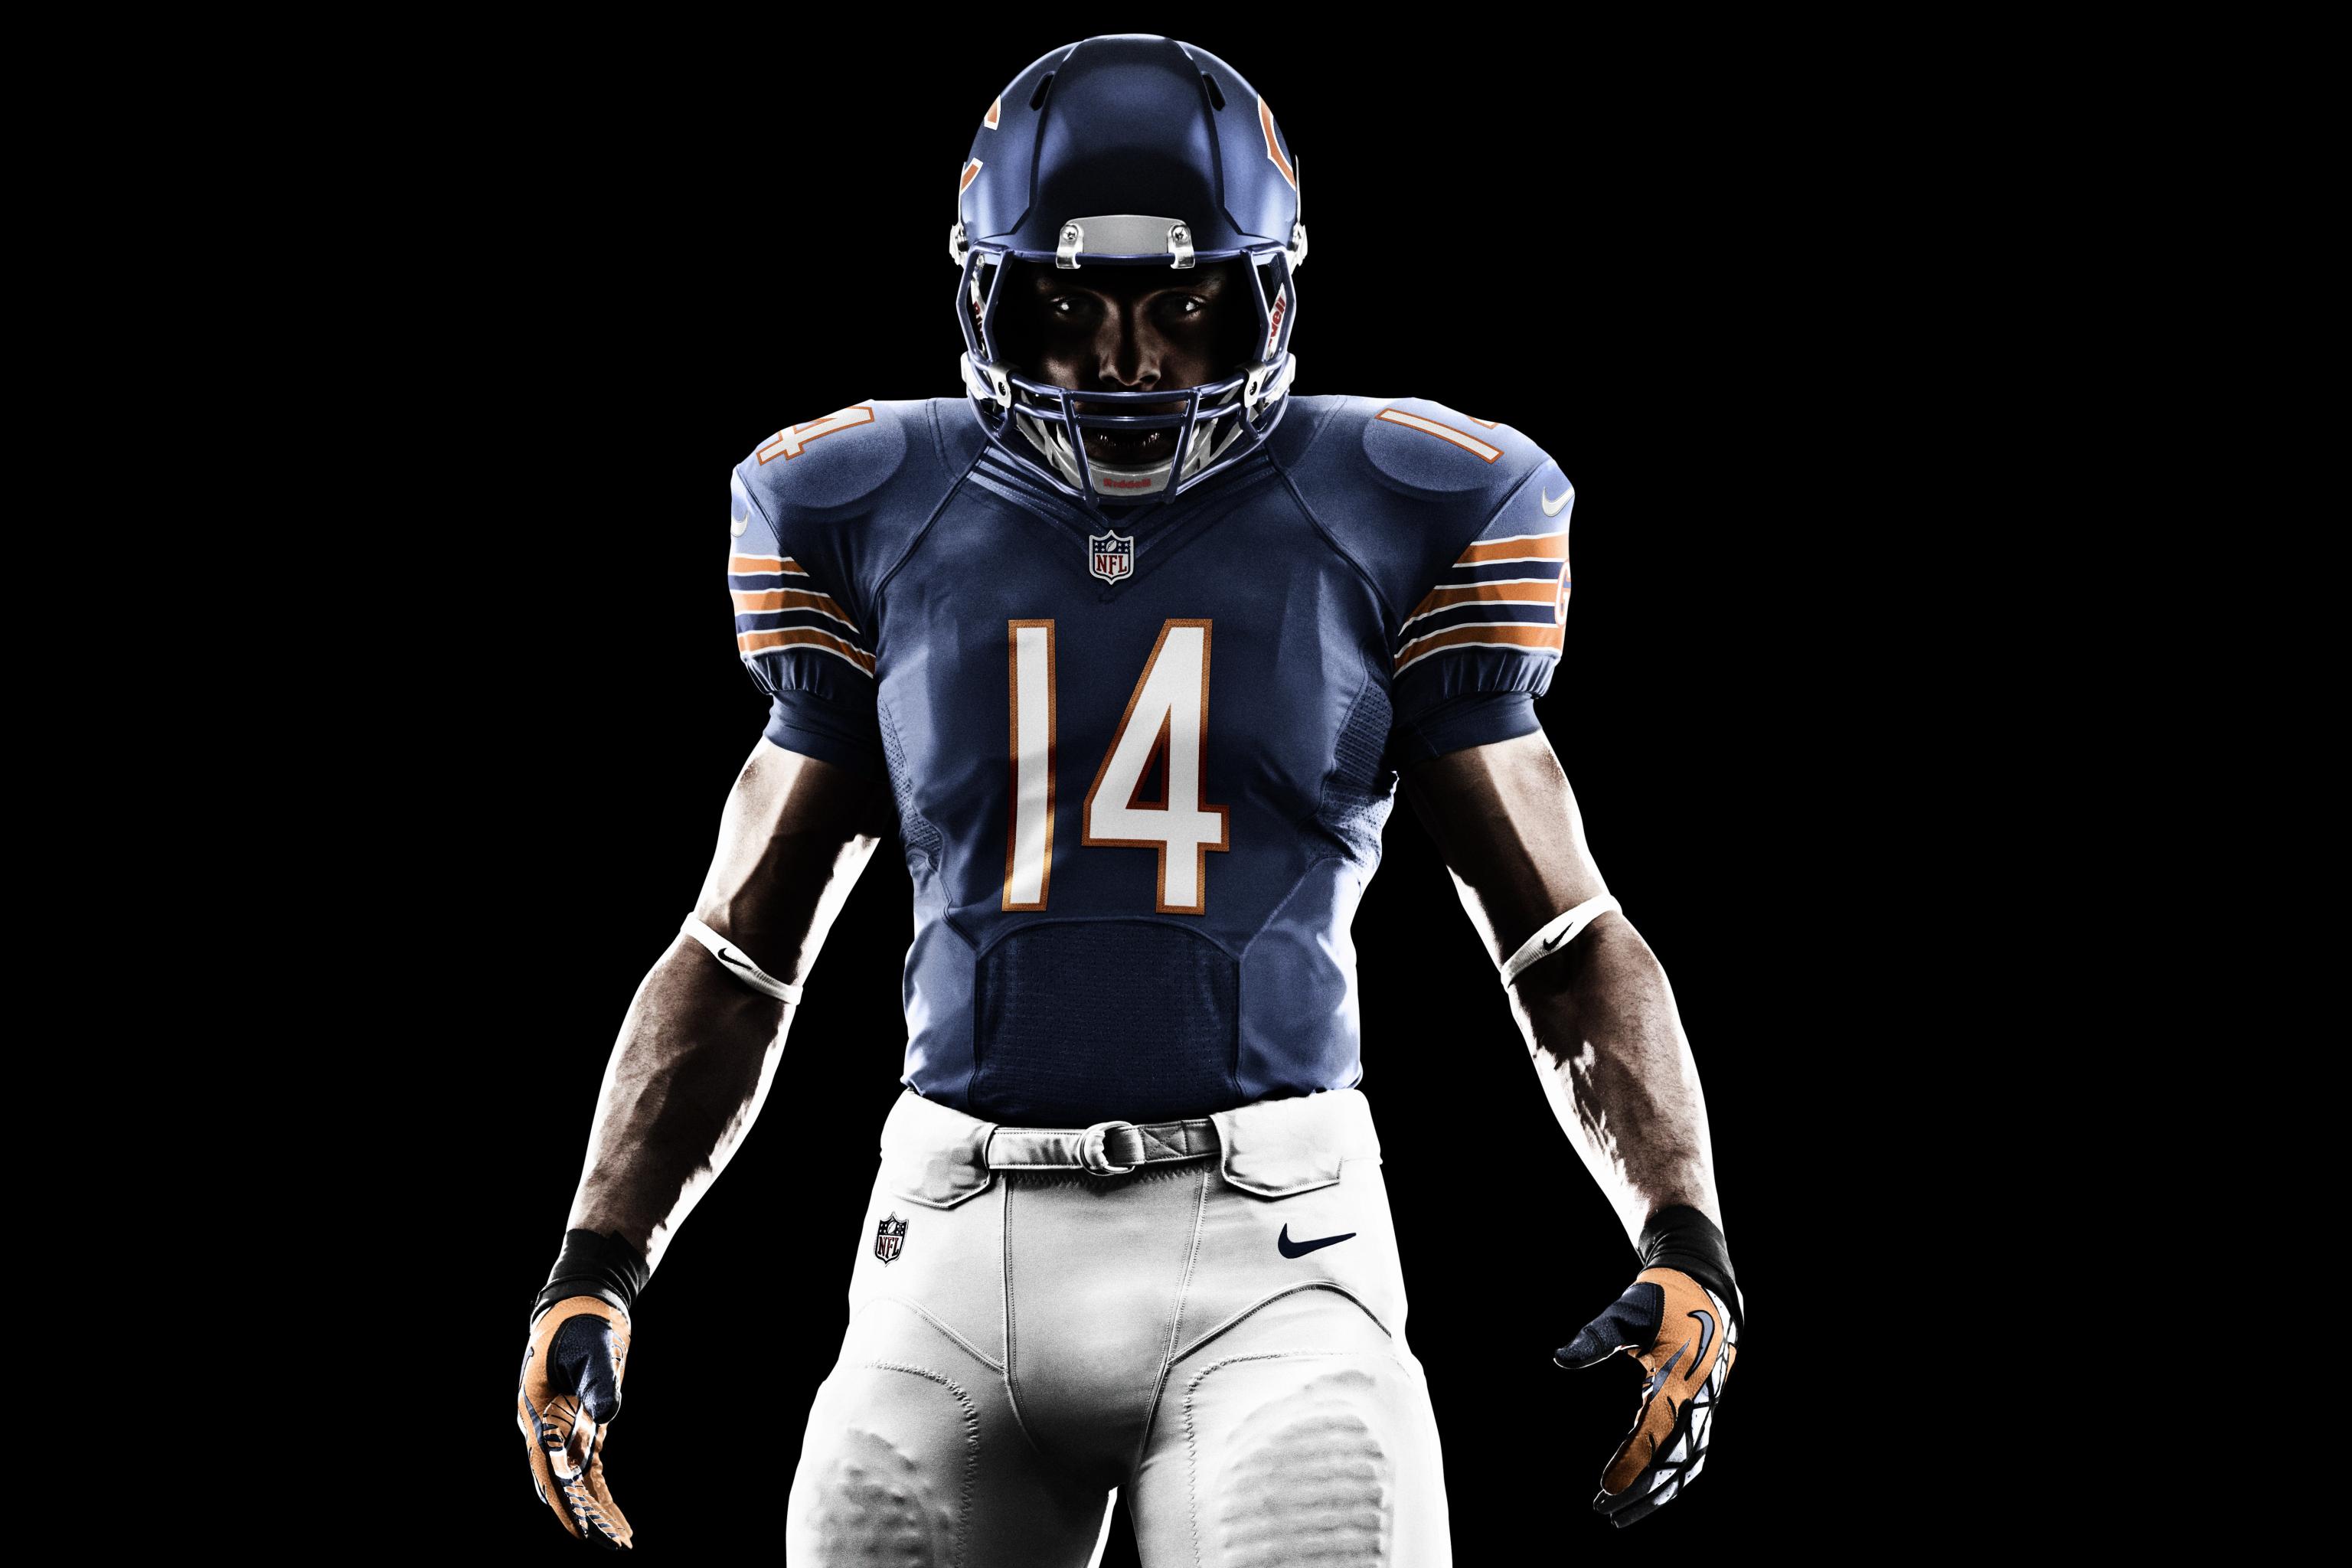 Why Do the Chicago Bears Have 'GSH' on Their Jersey?